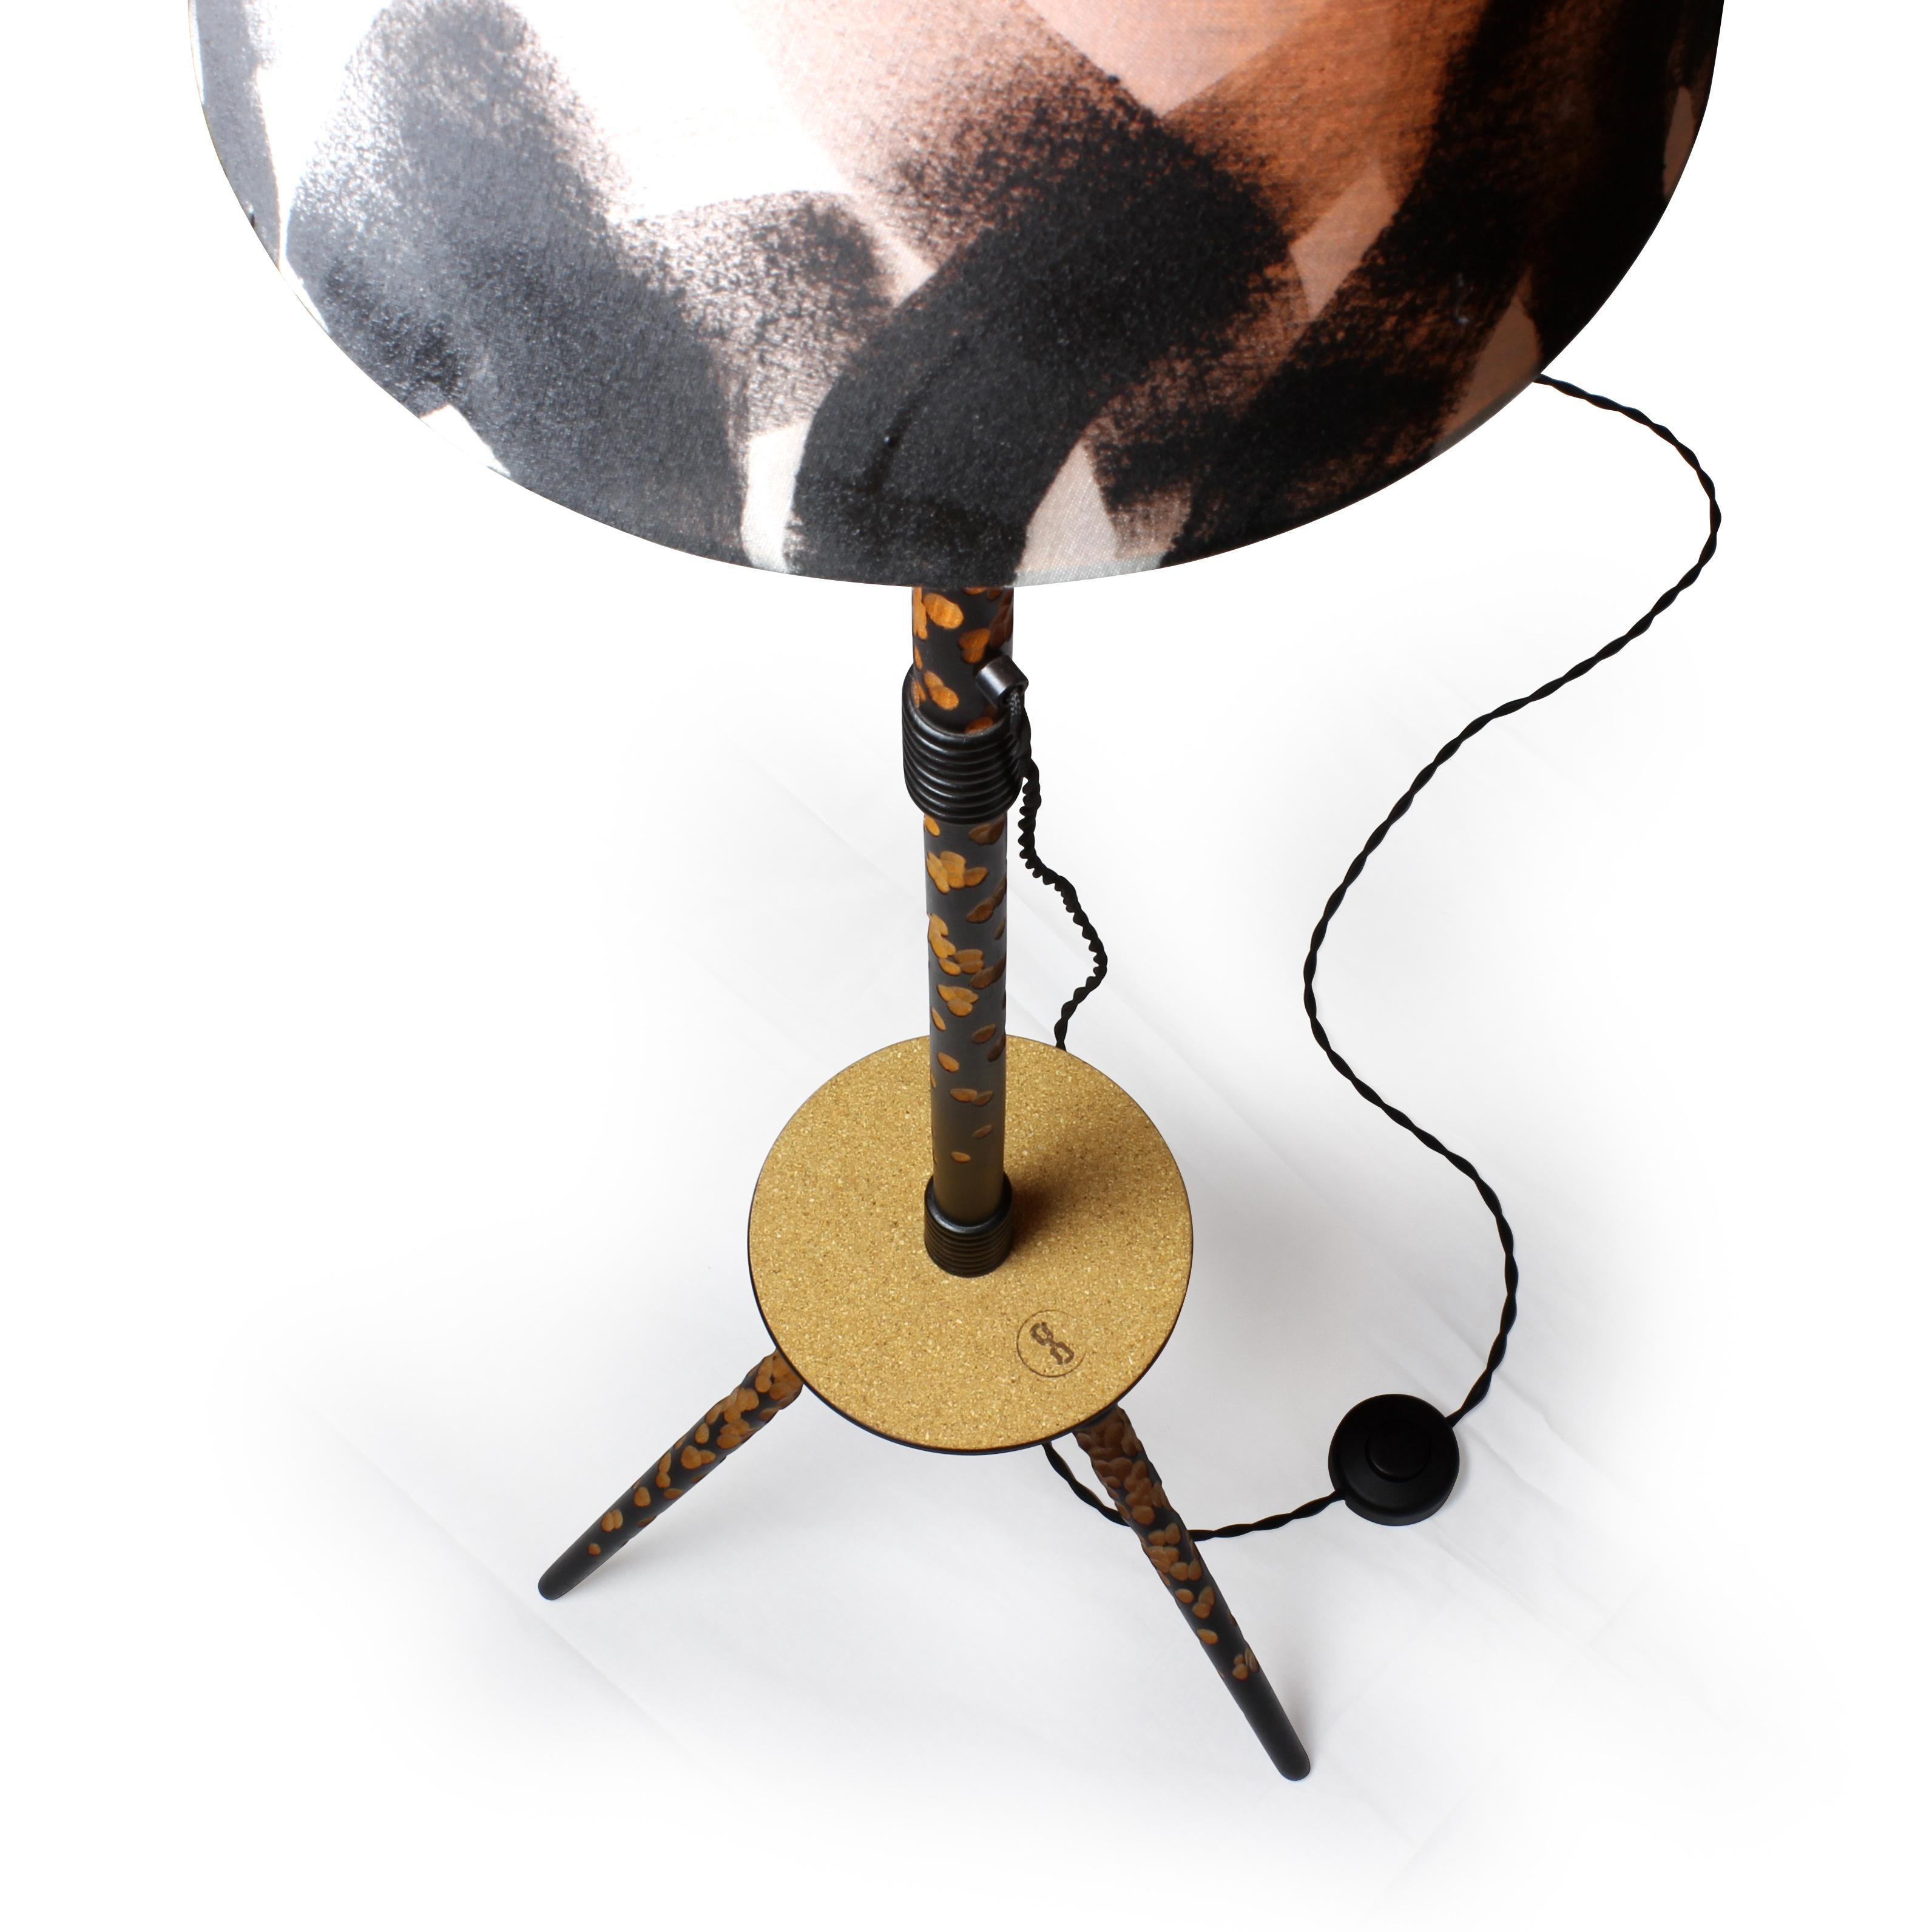 Collectible art sculpture mood lighting, one of a kind floor lamp, is made from salvaged wood furniture (mid-century style floor lamp). The wiring and hand painted lampshade are new. Creating new objects from these materials are the real challenge